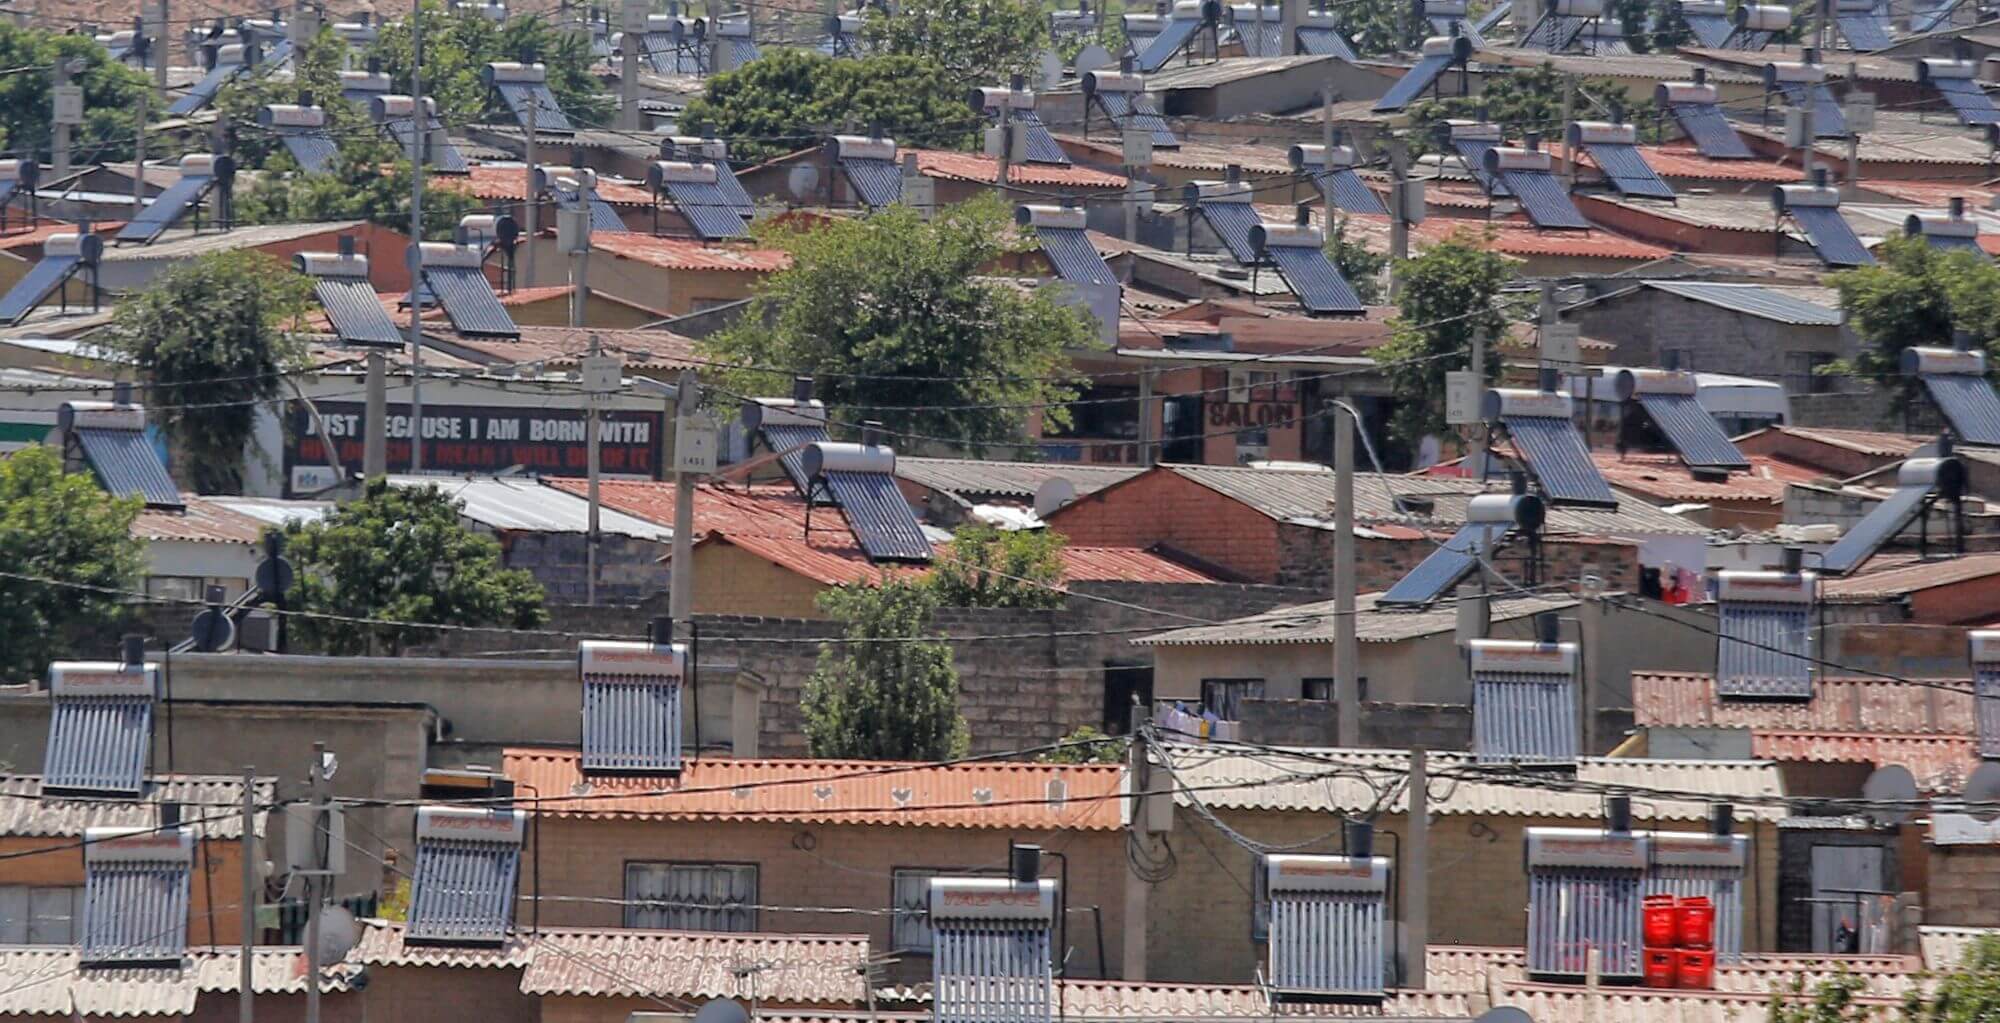 By some estimates, South Africa has a housing backlog of about 2.3 million, and that number grows by about 178,000 houses a year. Despite the country’s sophisticated banking system, busy property market, generous impact investment projects and advanced construction industry, neither the public nor private sector has been able to catch up that backlog.